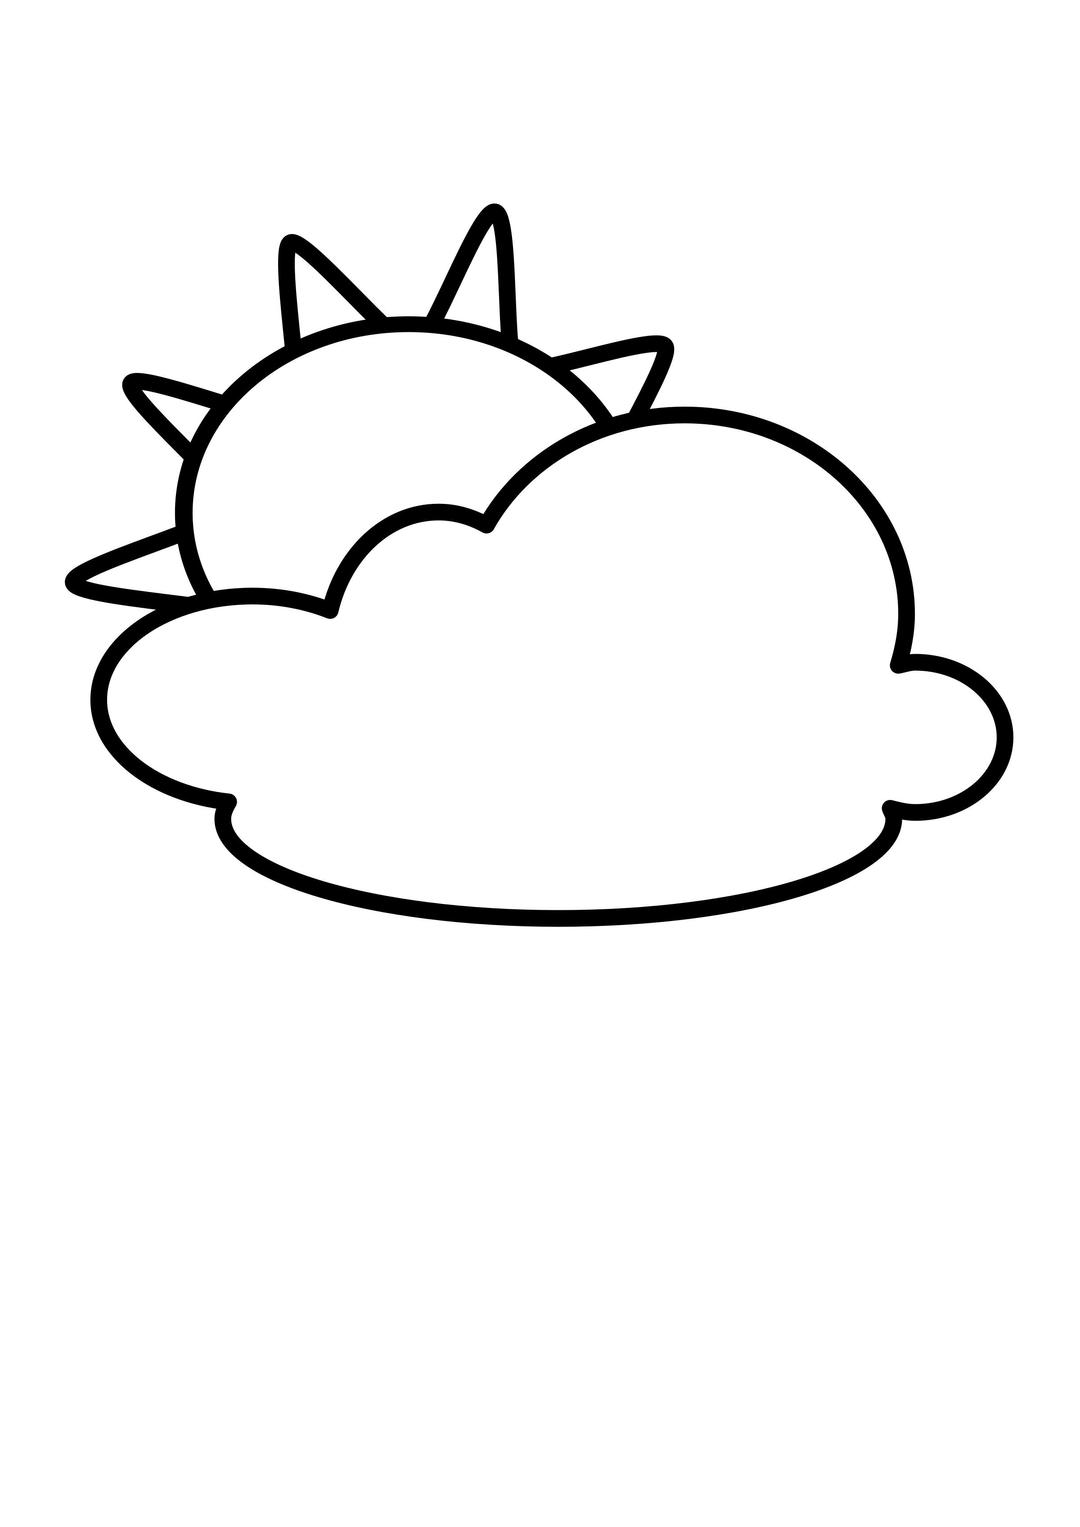 Cloudy - Outline png transparent